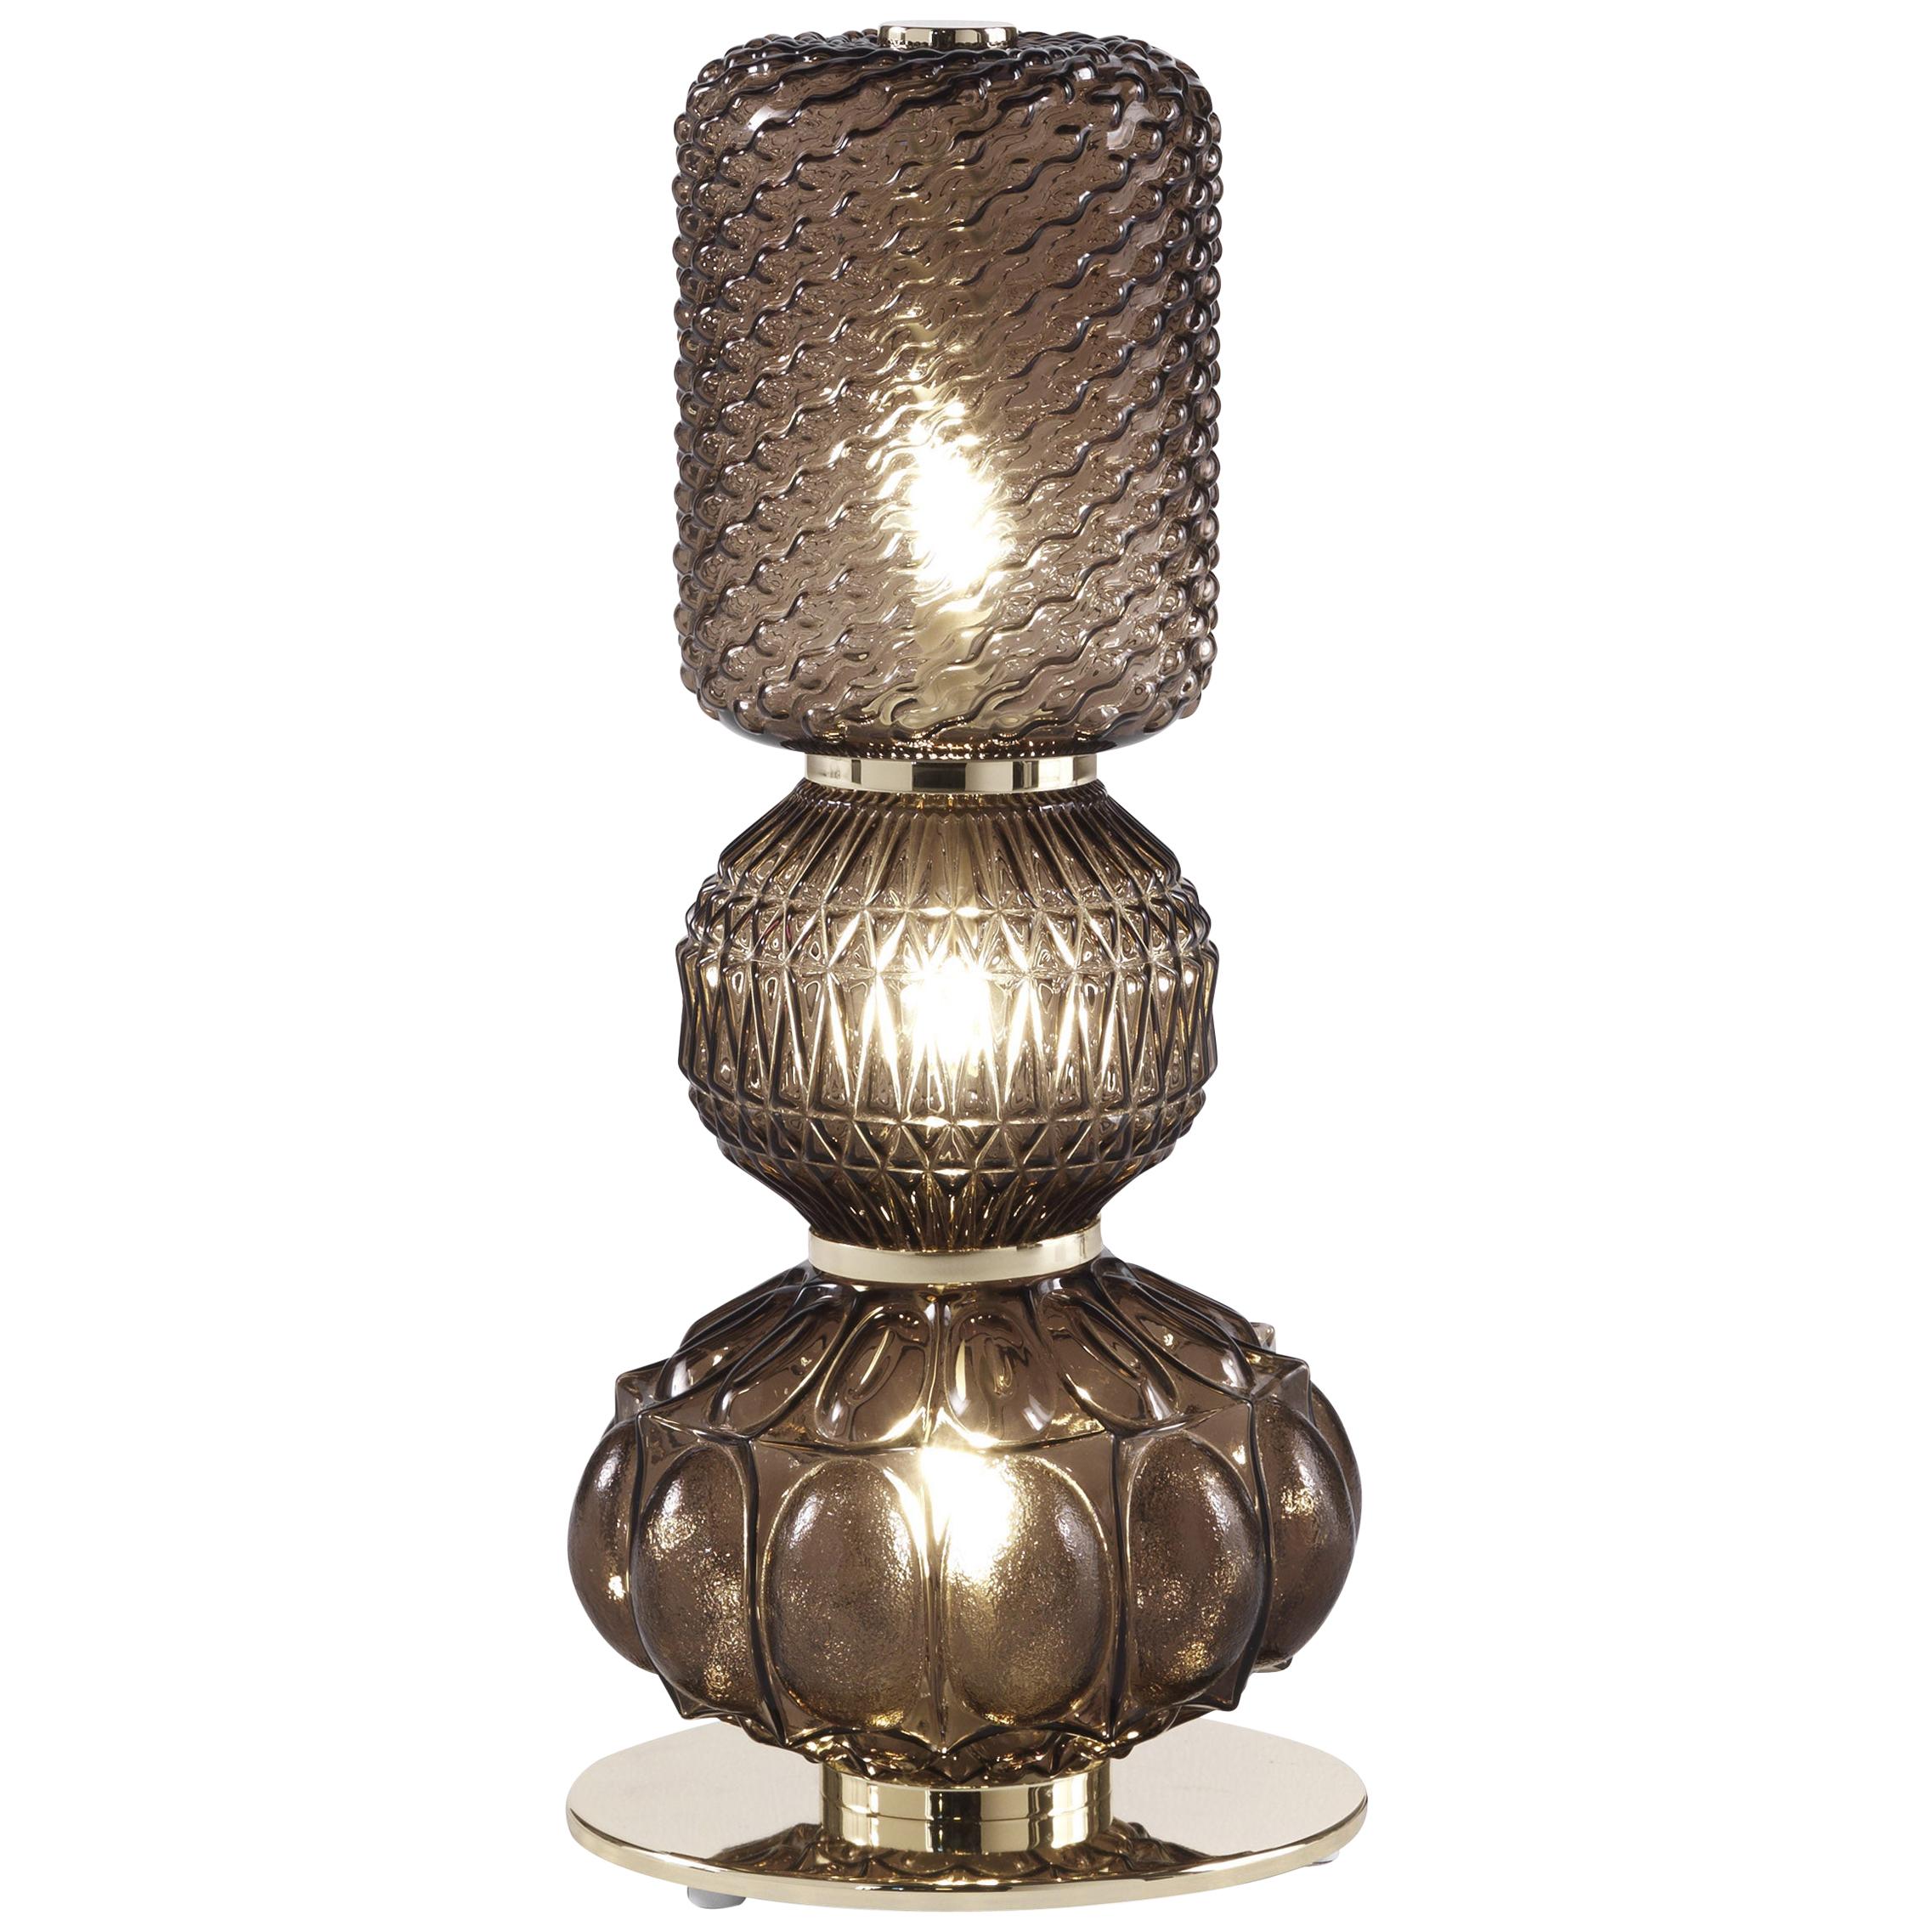 21st Century Chagall Table Lamp in Metal and Glass by Etro Home Interiors For Sale